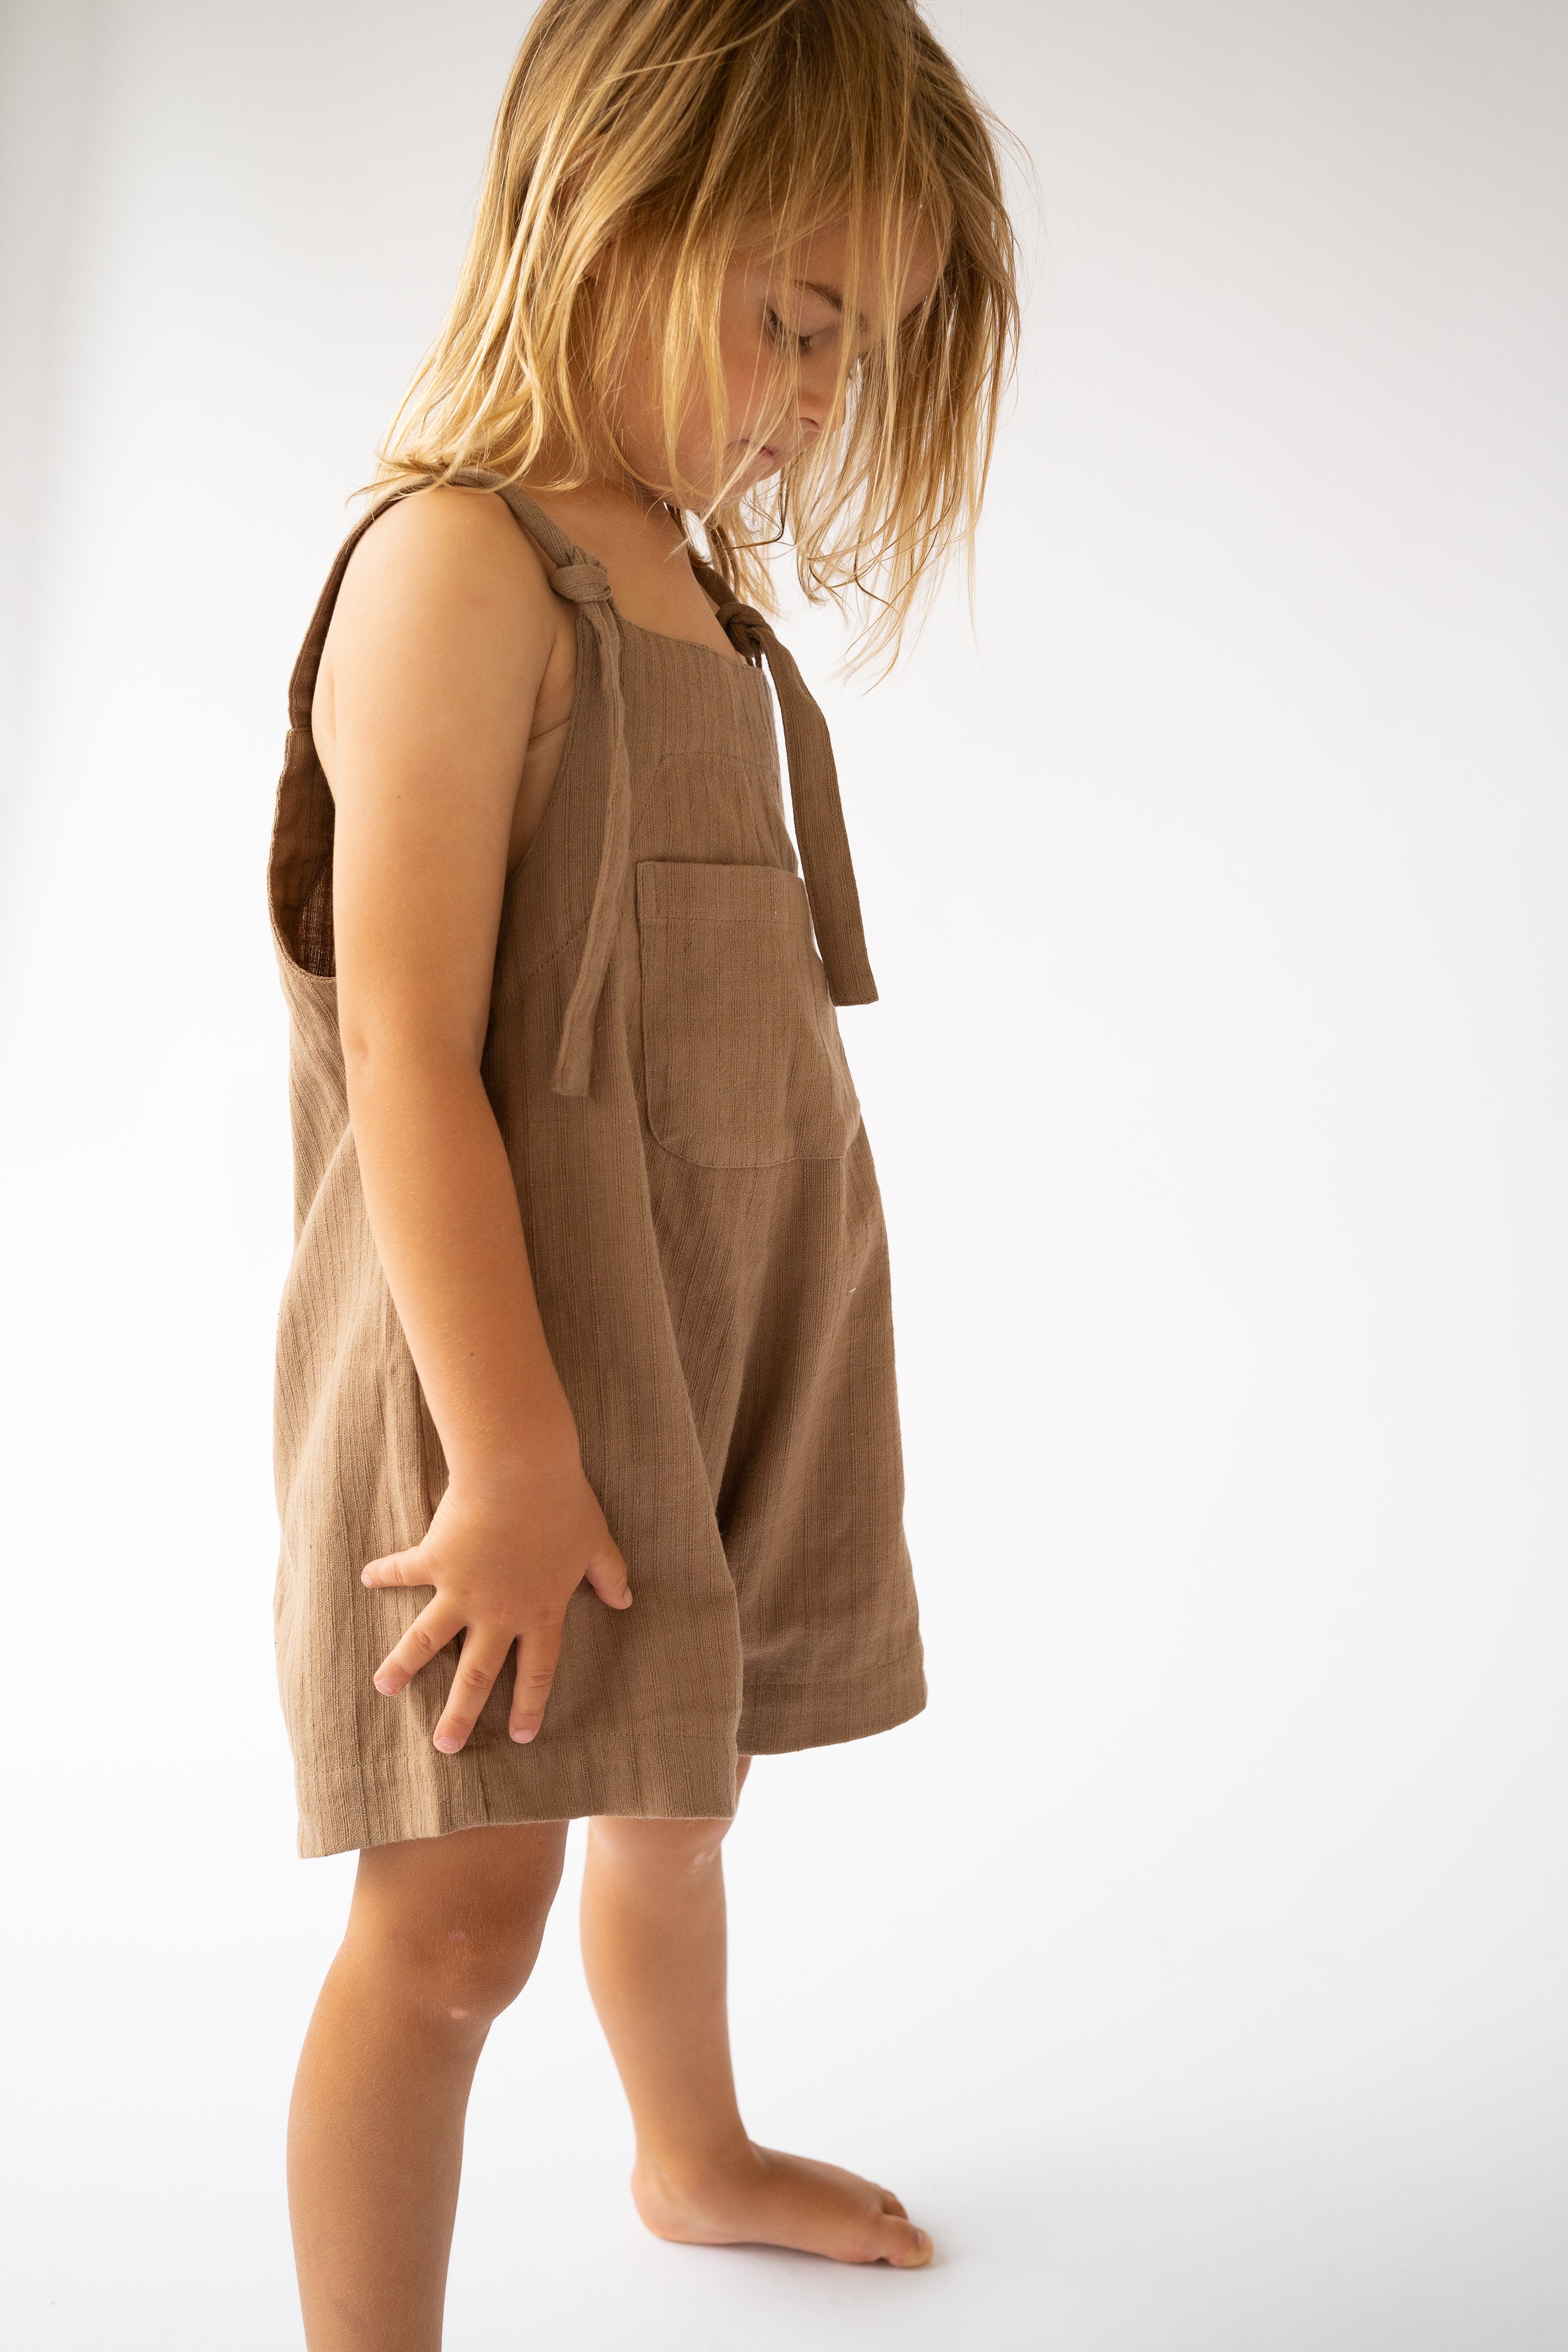 Unisex Short Marlow Overalls or Dungarees| Chocolate